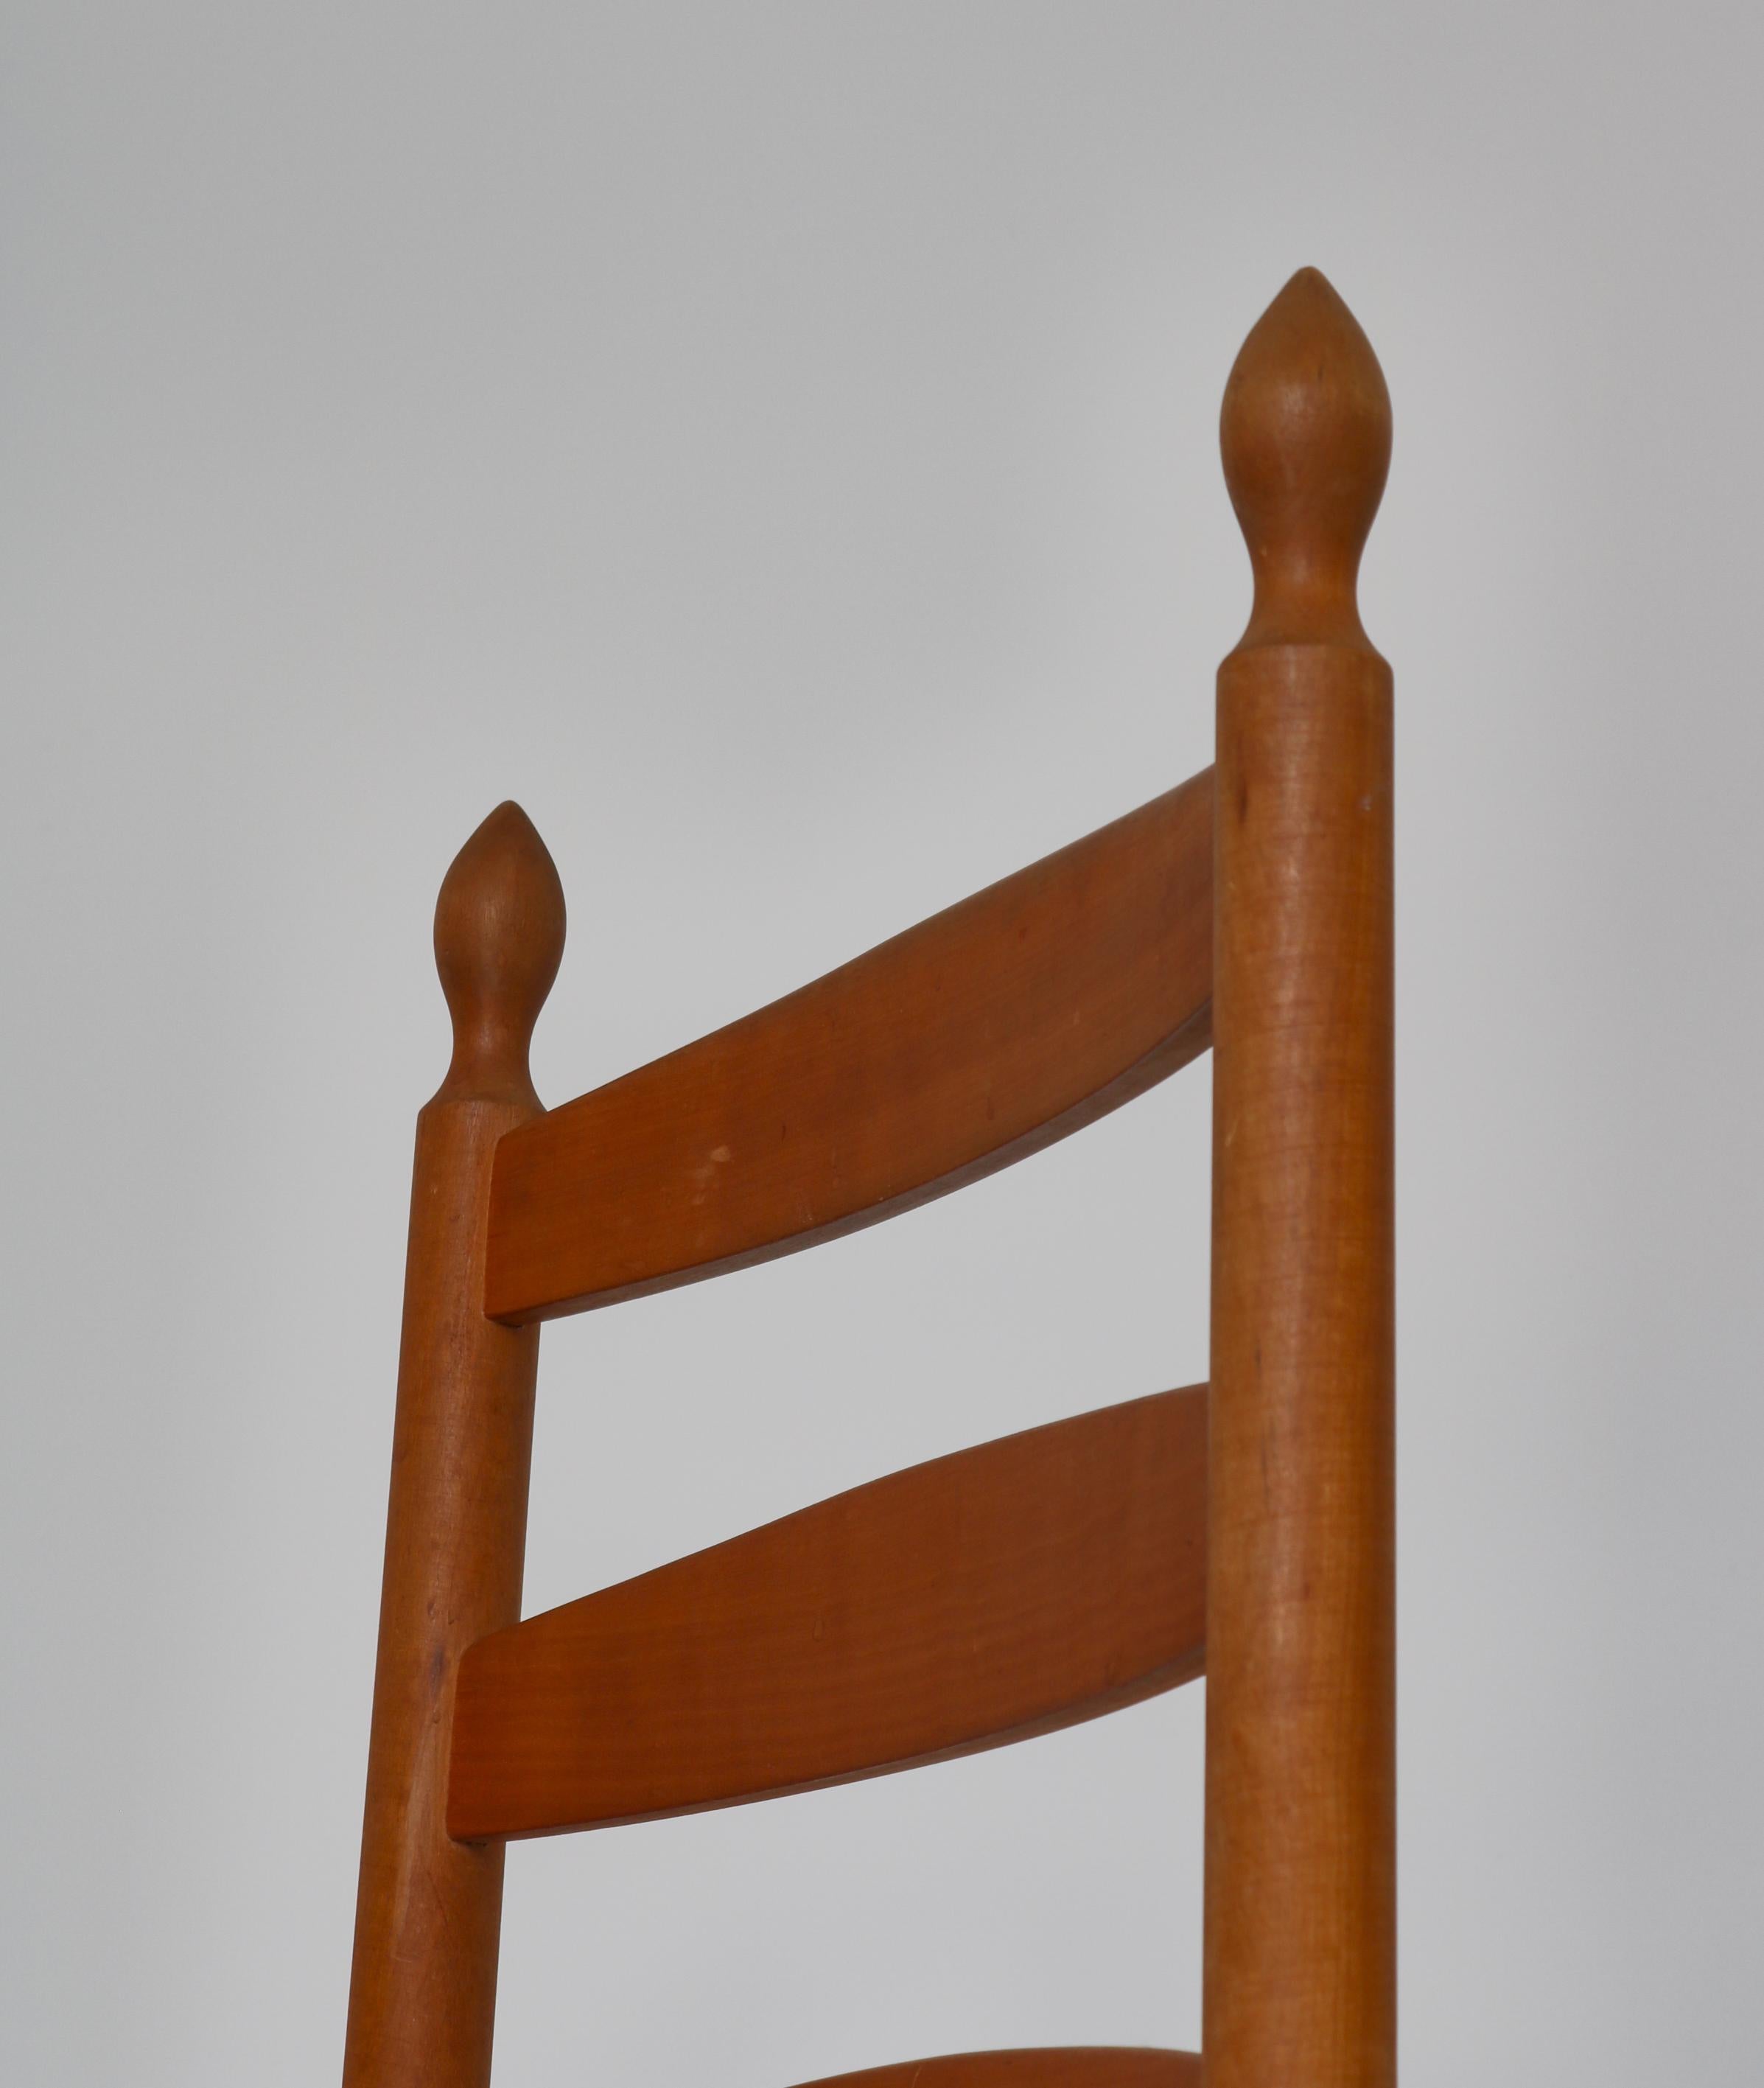 Vintage Scandinavian Shaker Chair in Beech and Leather Seat, Denmark, 1960s For Sale 4